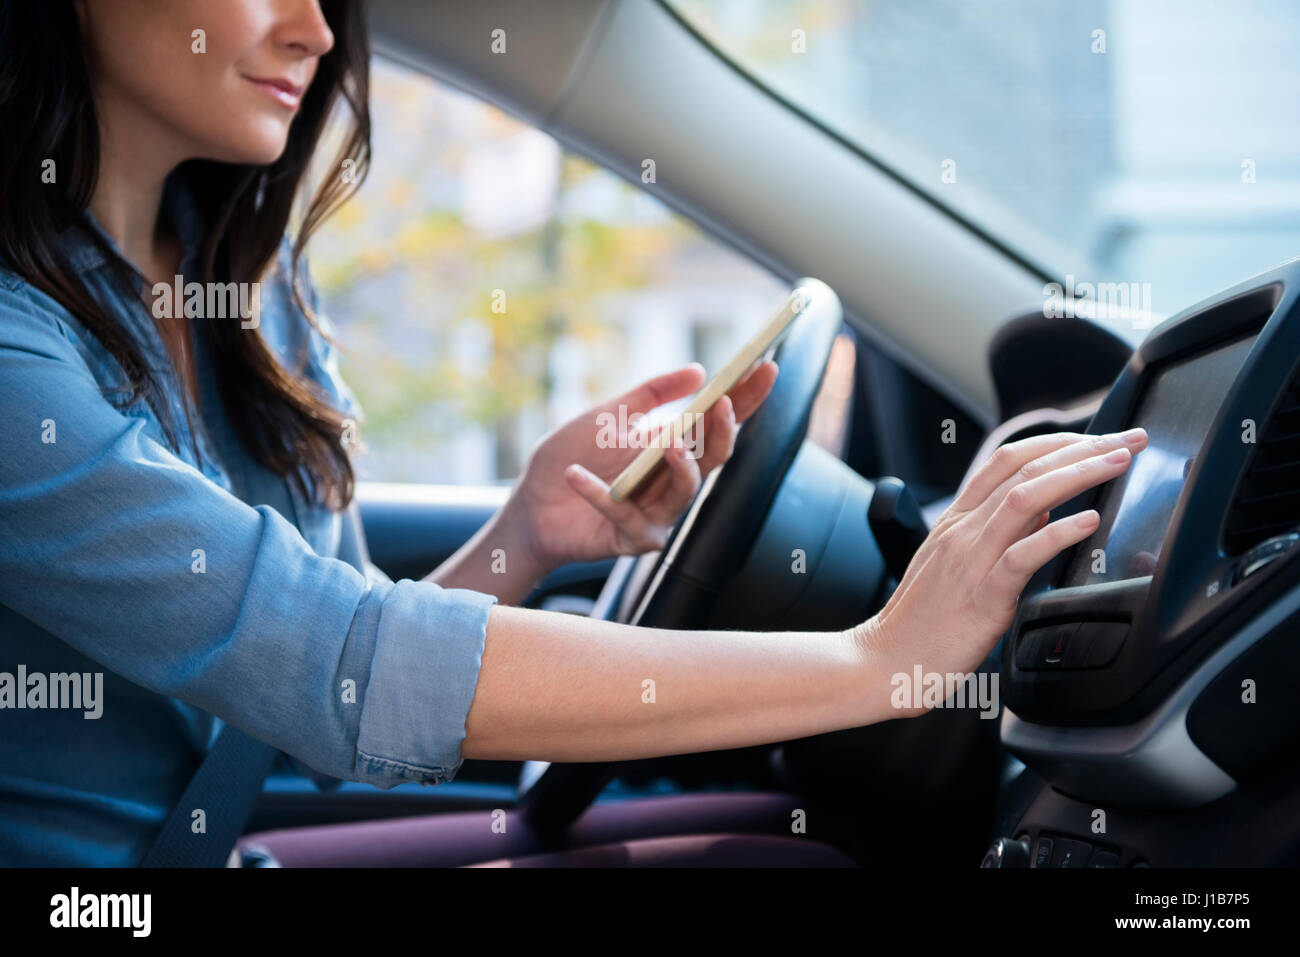 Caucasian woman in car holding cell phone programming journey Stock Photo